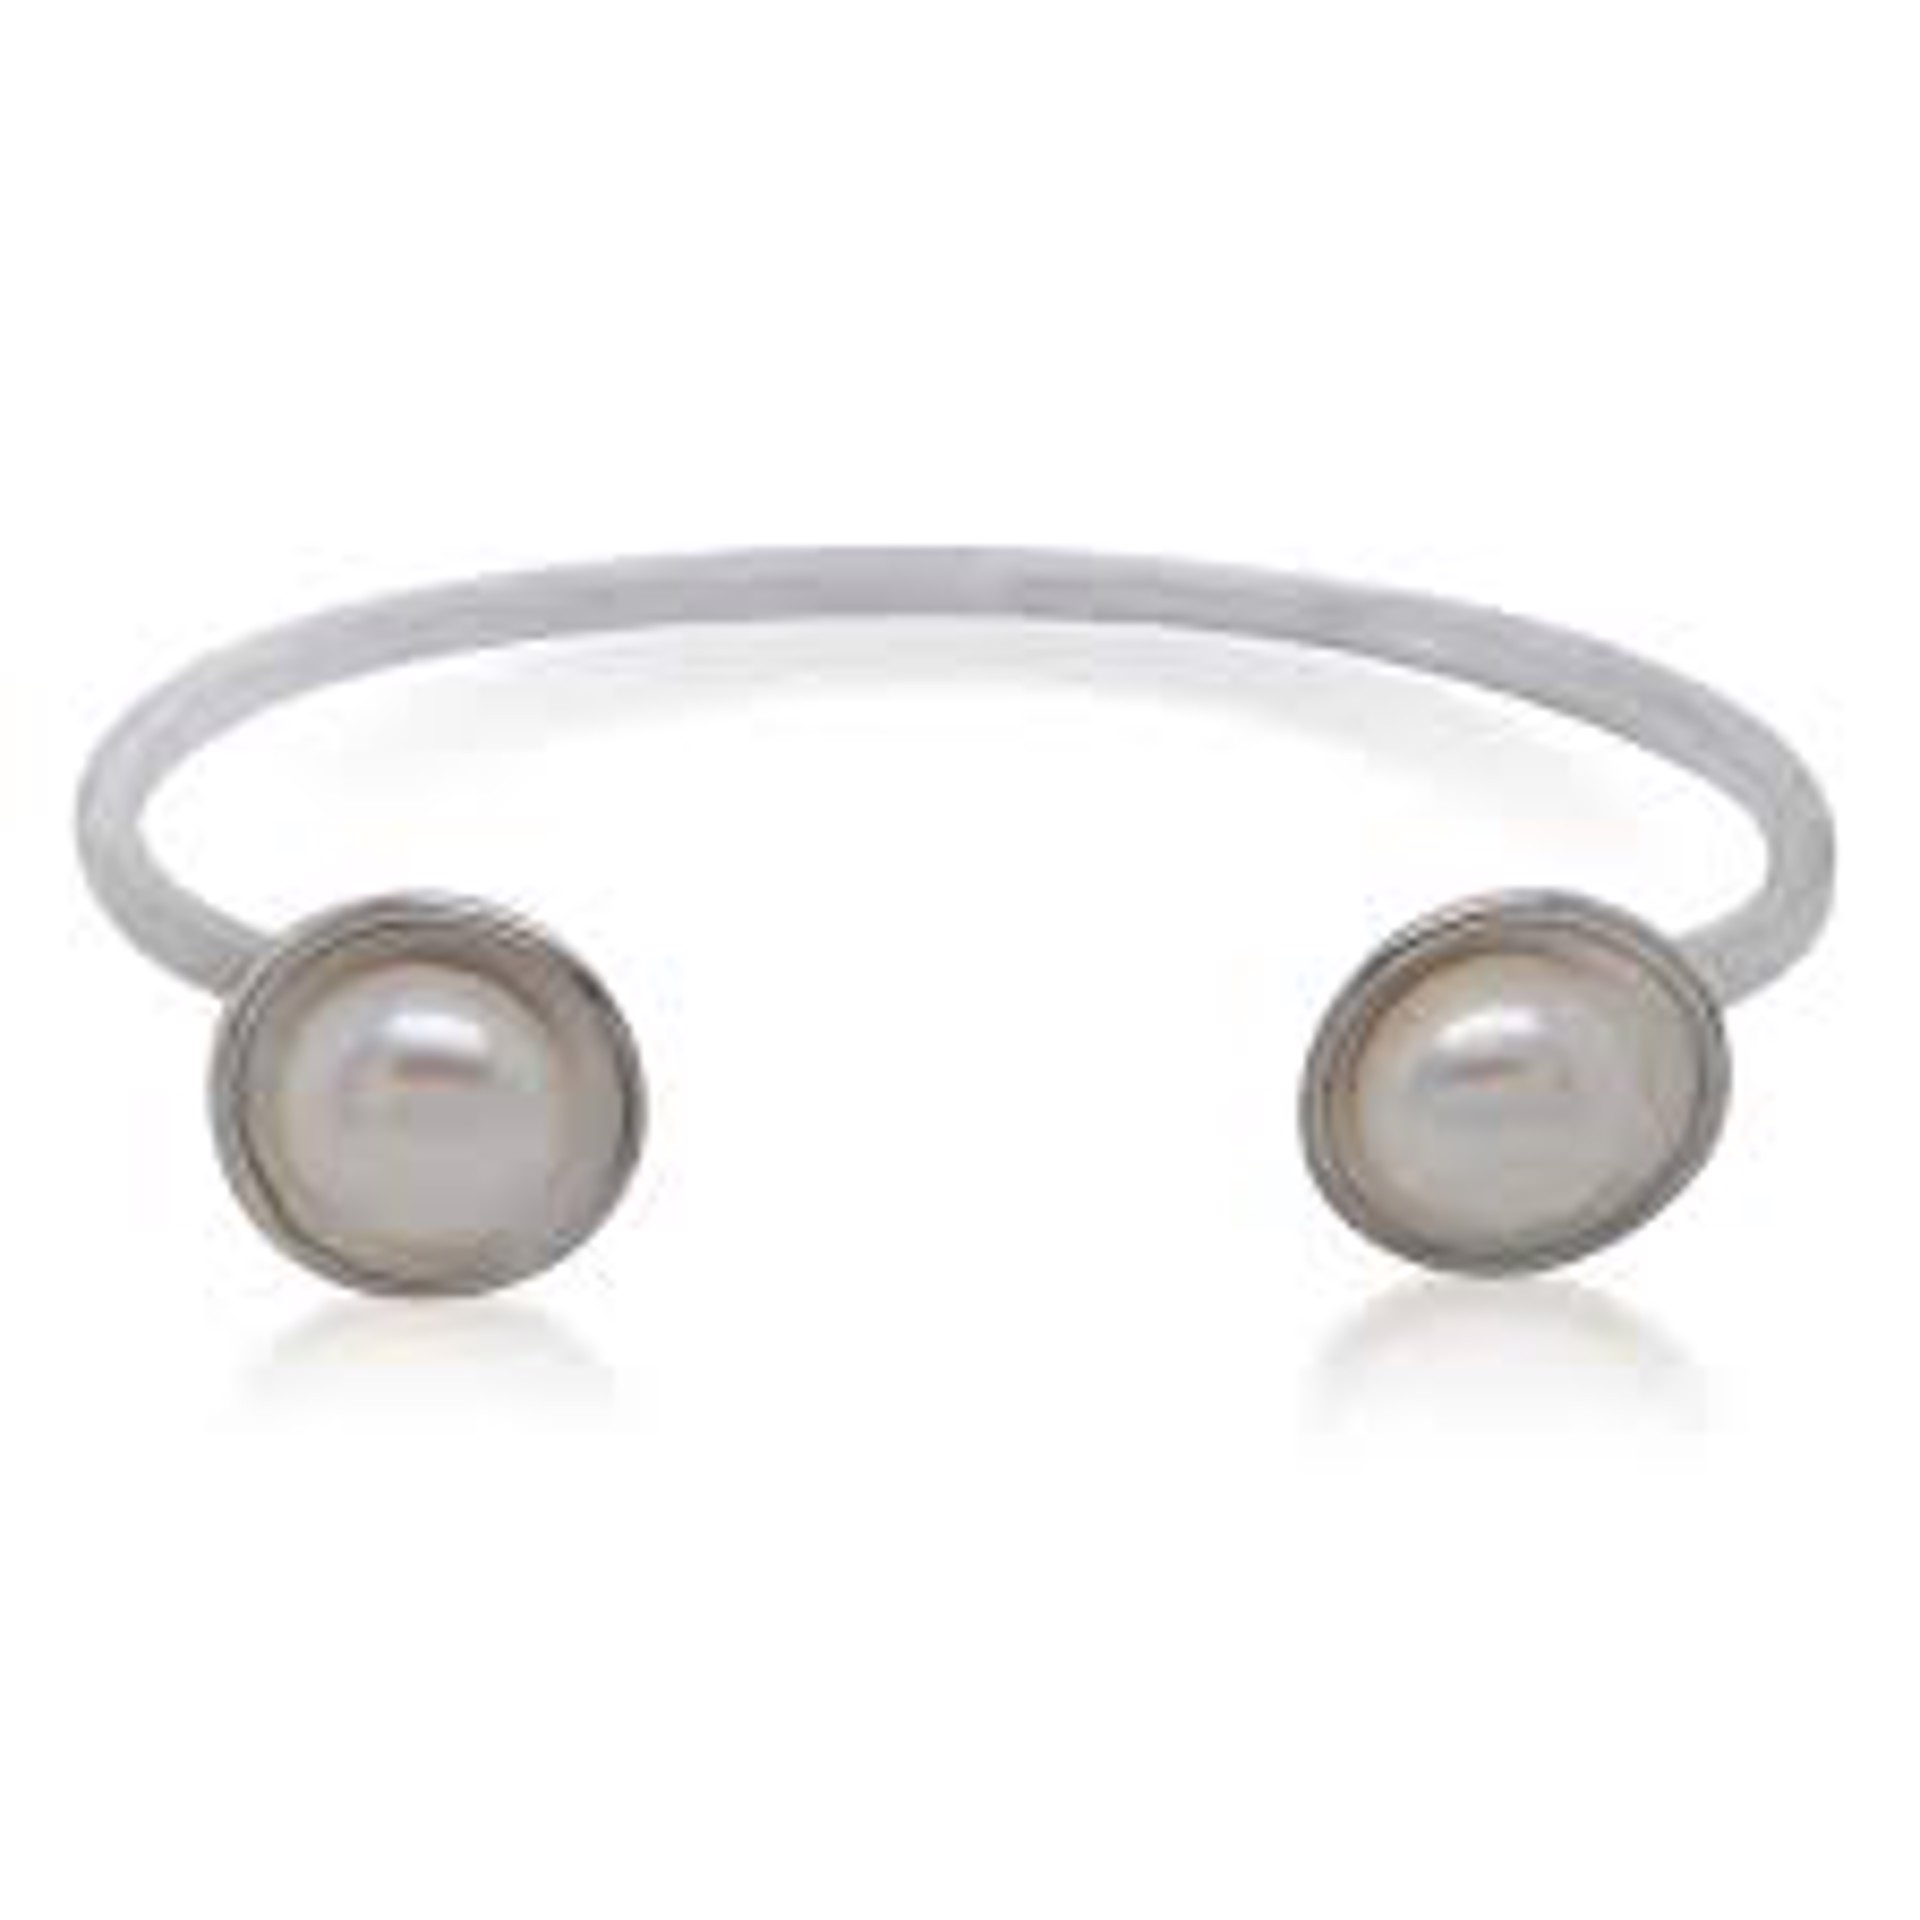 Hammered Pearl Bangle by Kristen Baird